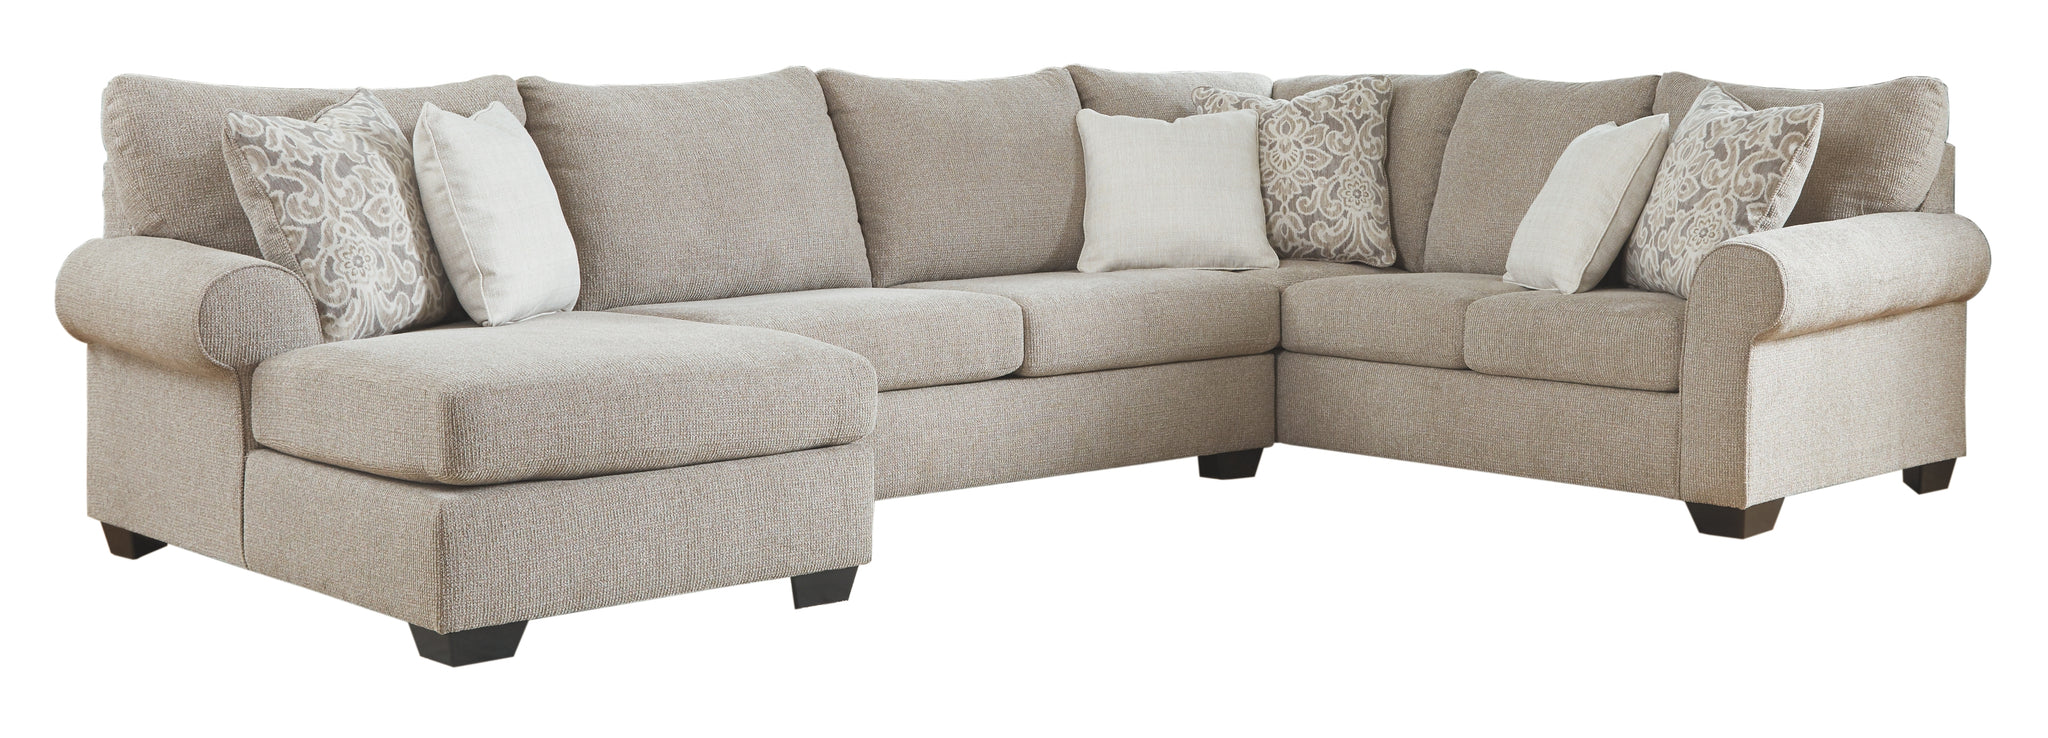 Baranello Benchcraft 3-Piece Sectional with Chaise